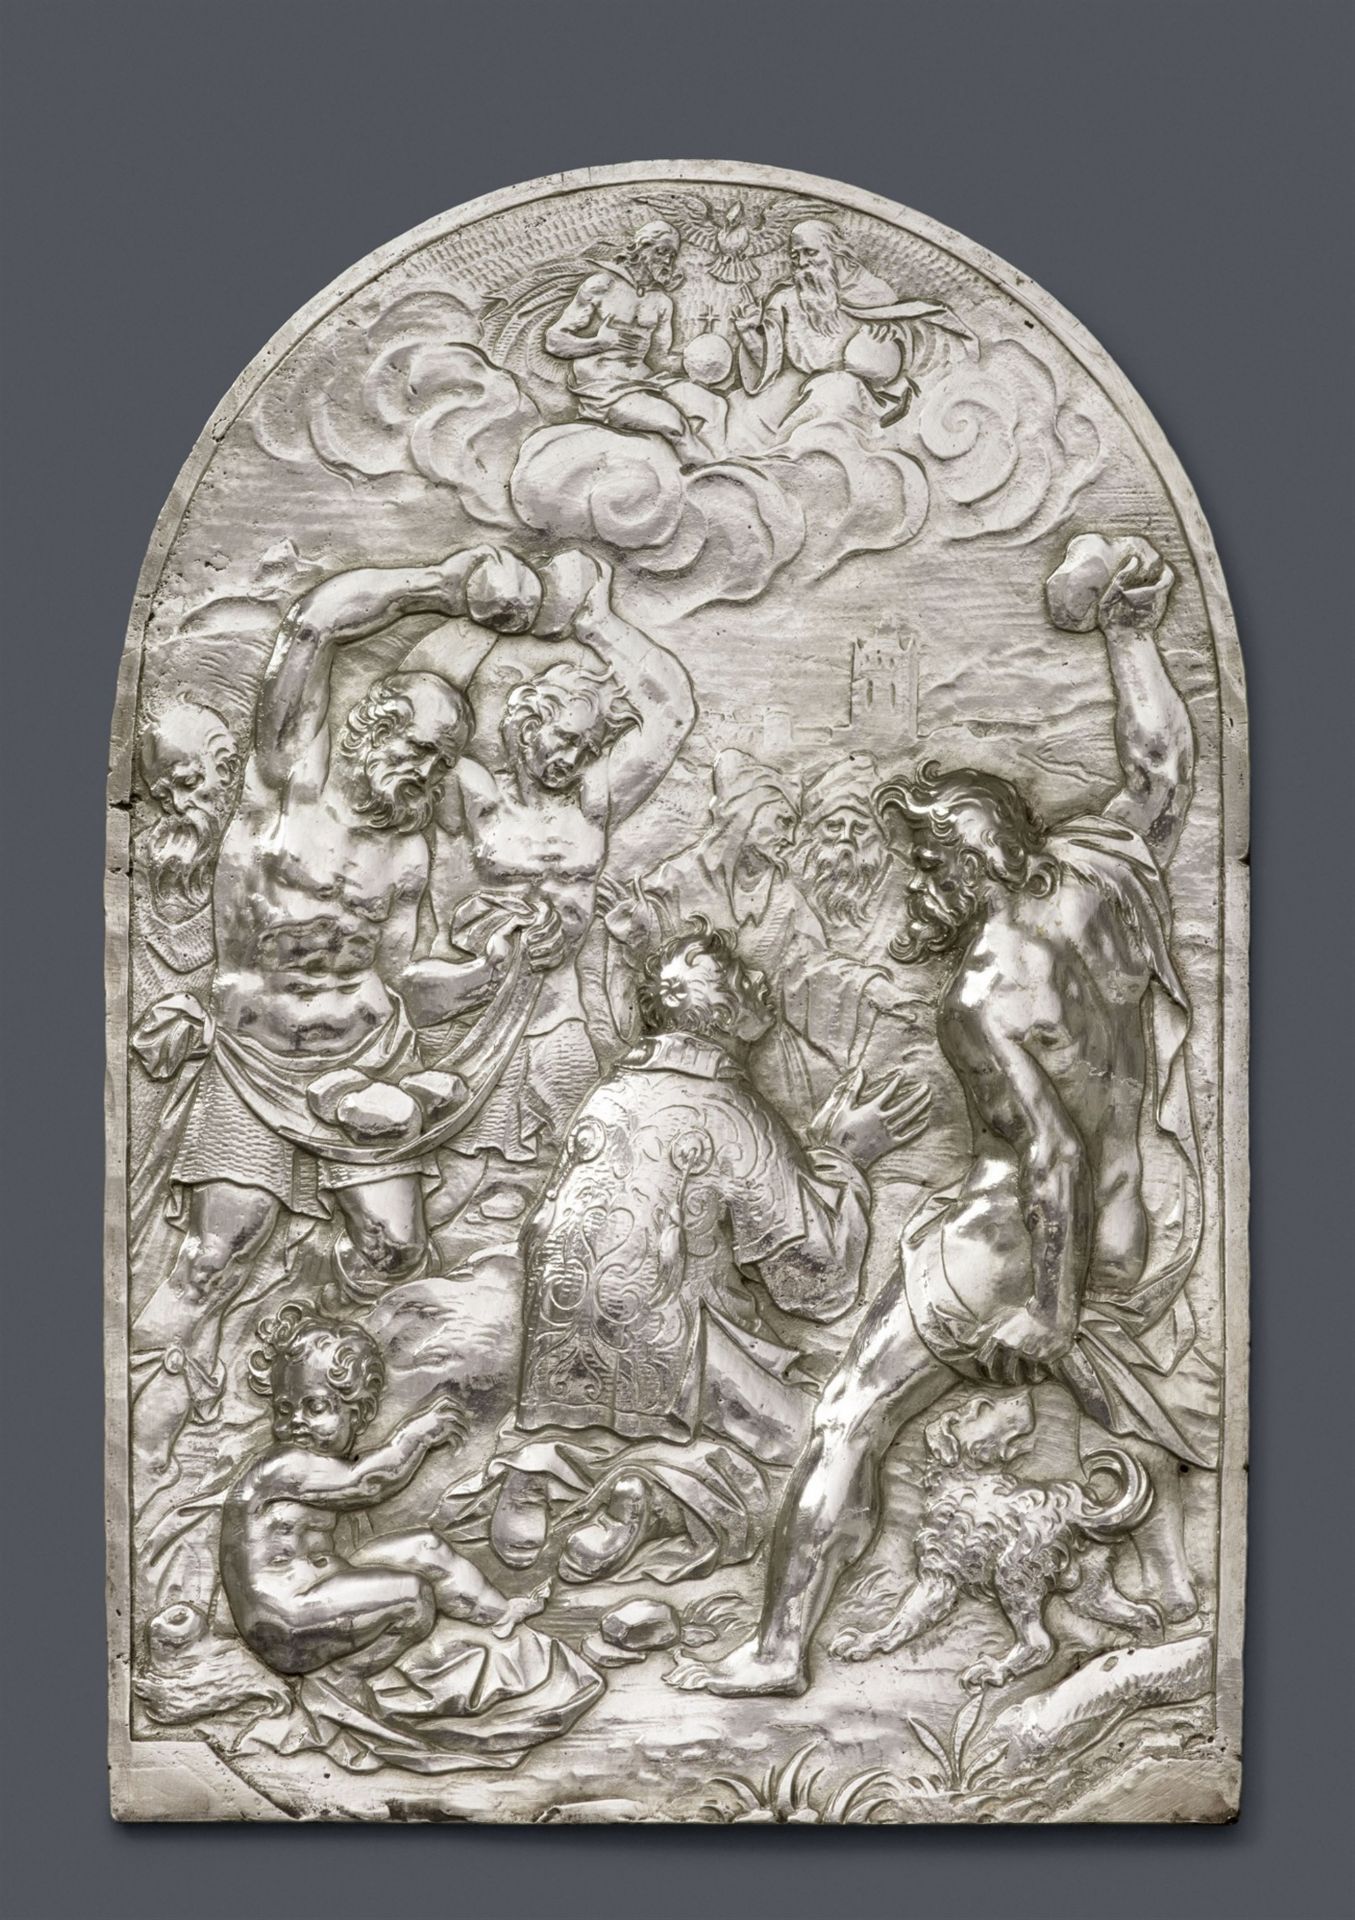 A silver relief with the martyrdom of St. Stephen